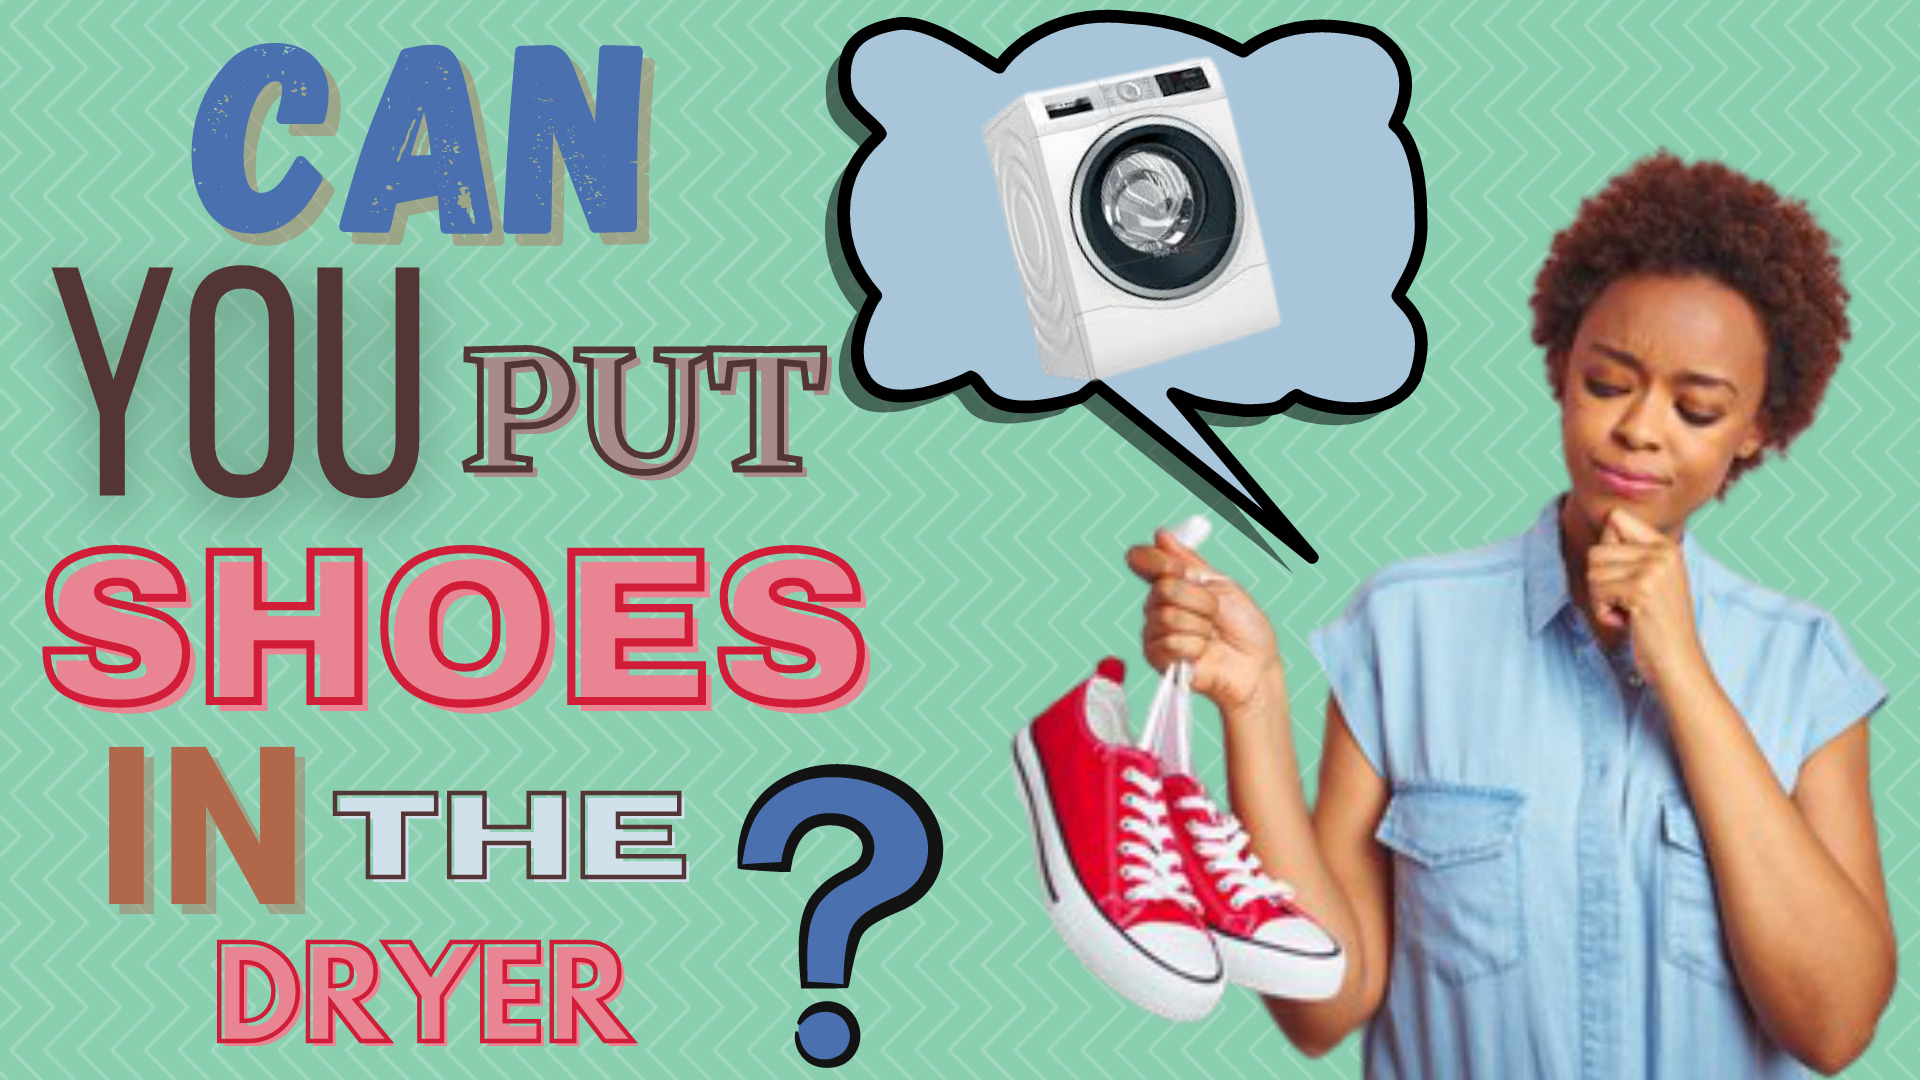 Can you Put Shoes in the Dryer?